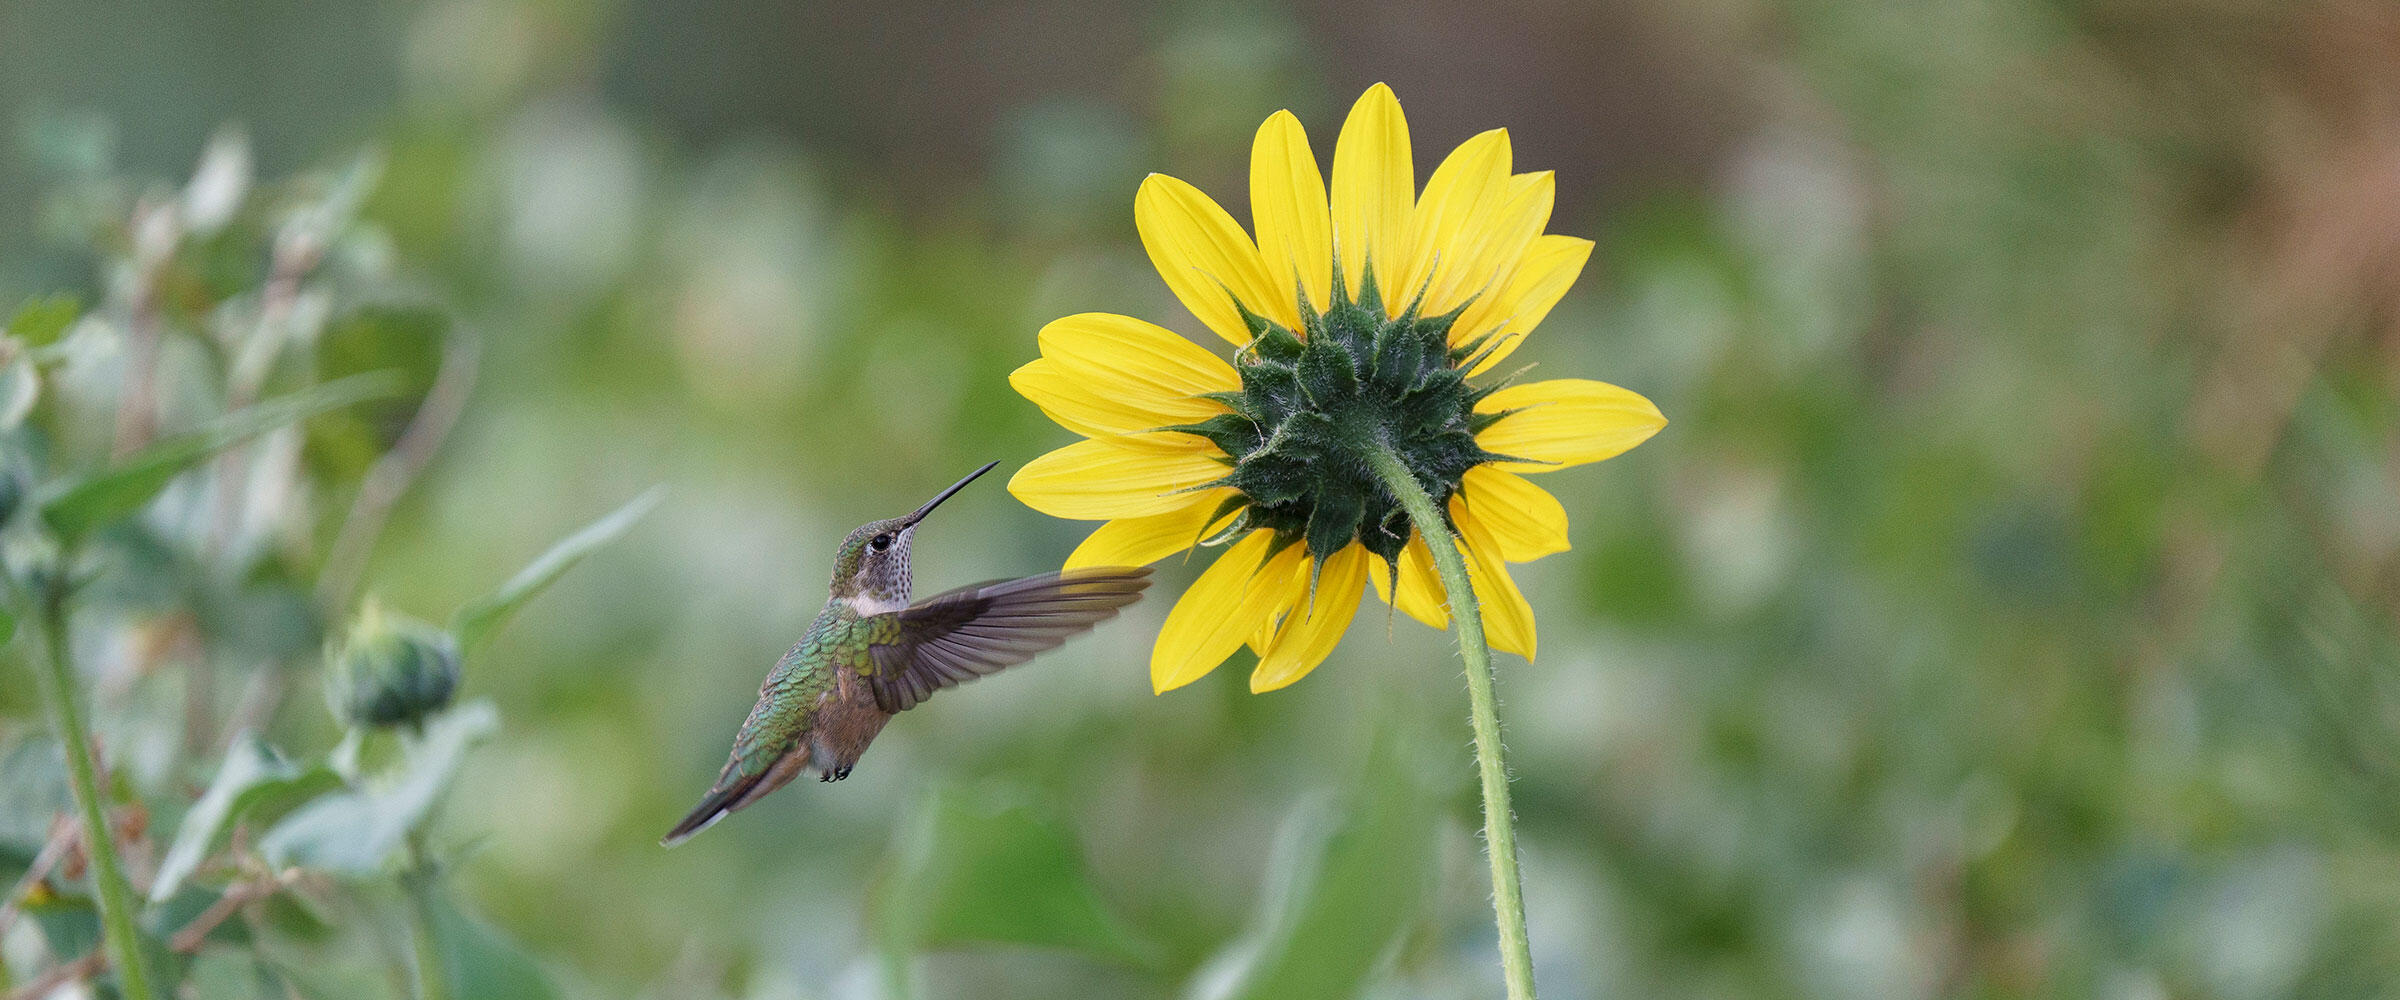 Broad-tailed Hummingbird visiting annual sunflower